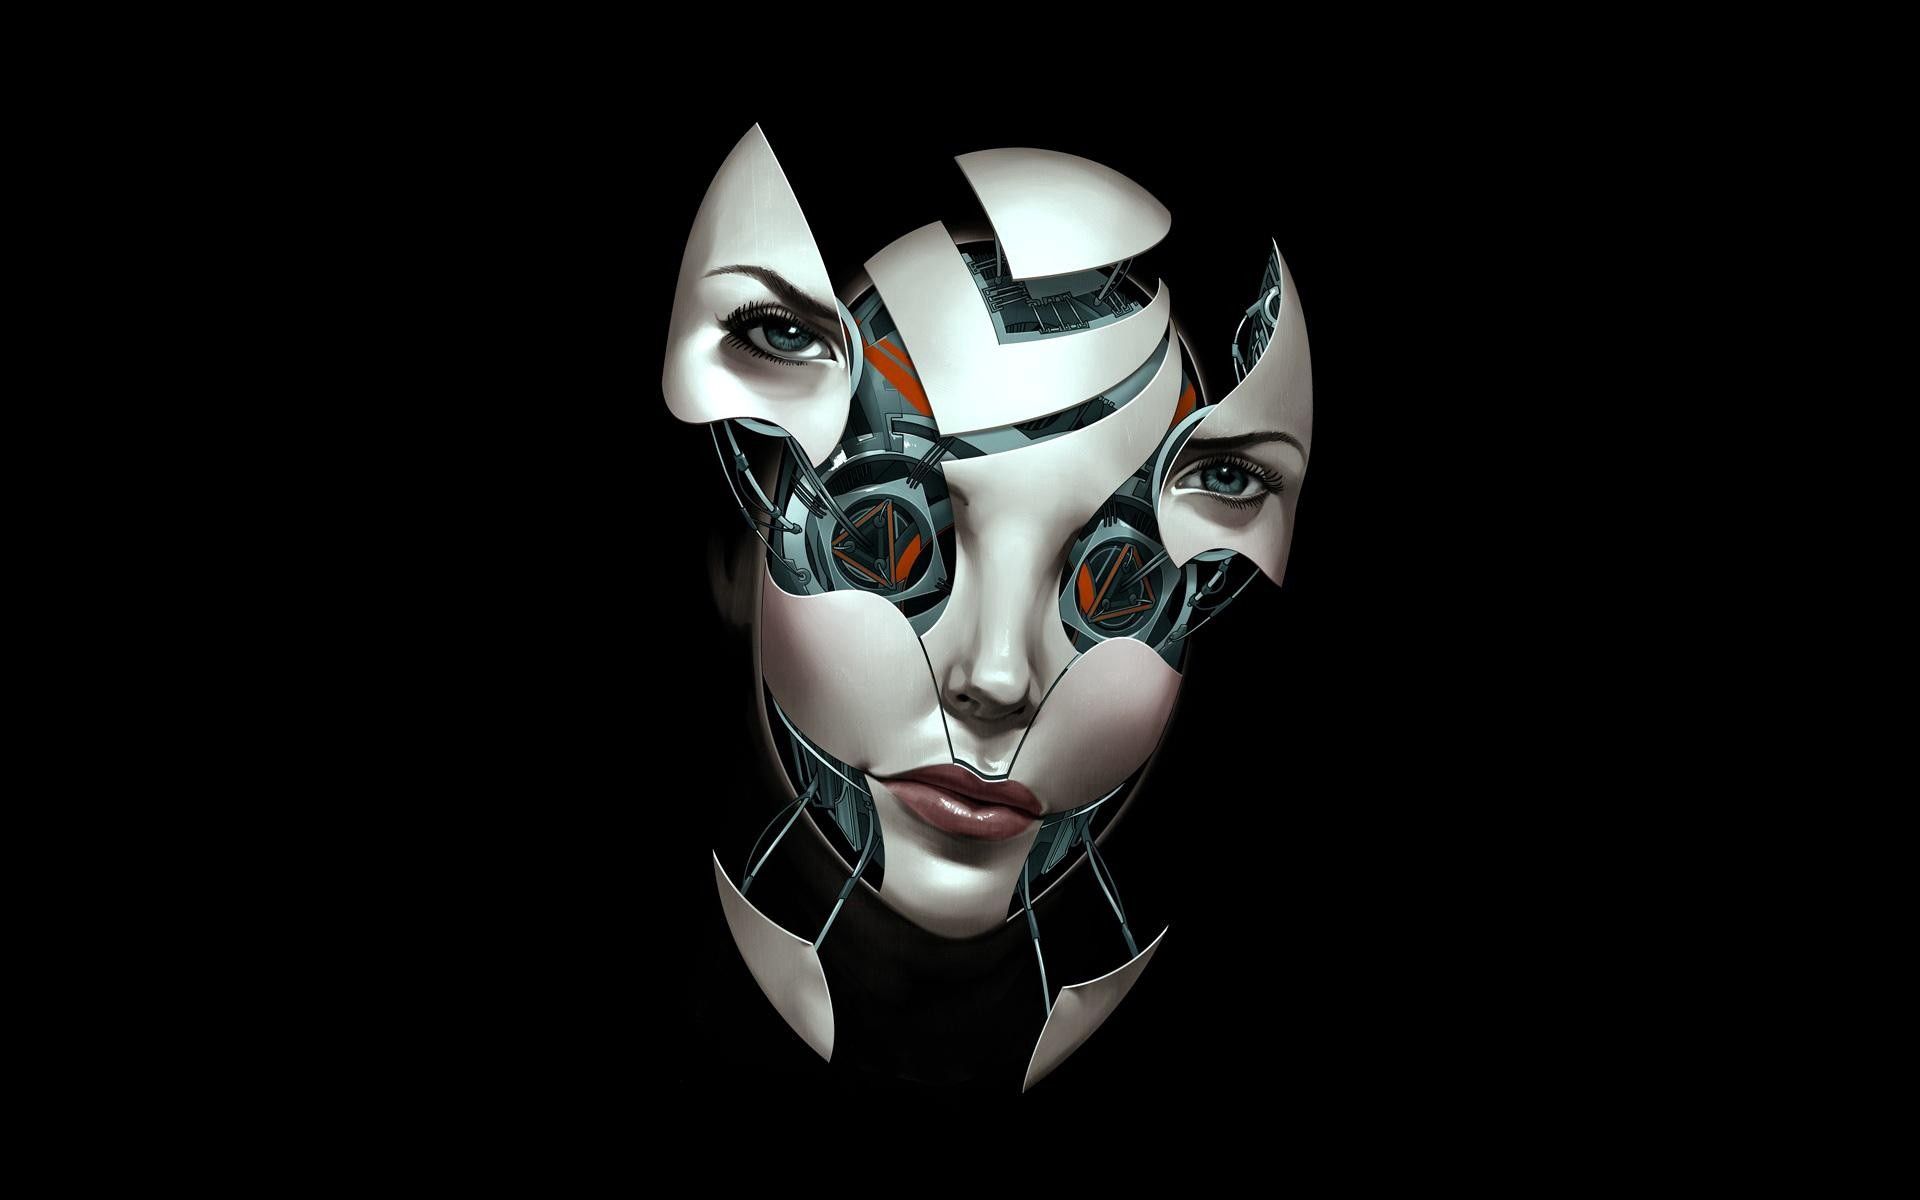 dark background, abstract, robot, shards, smithereens, compound, face